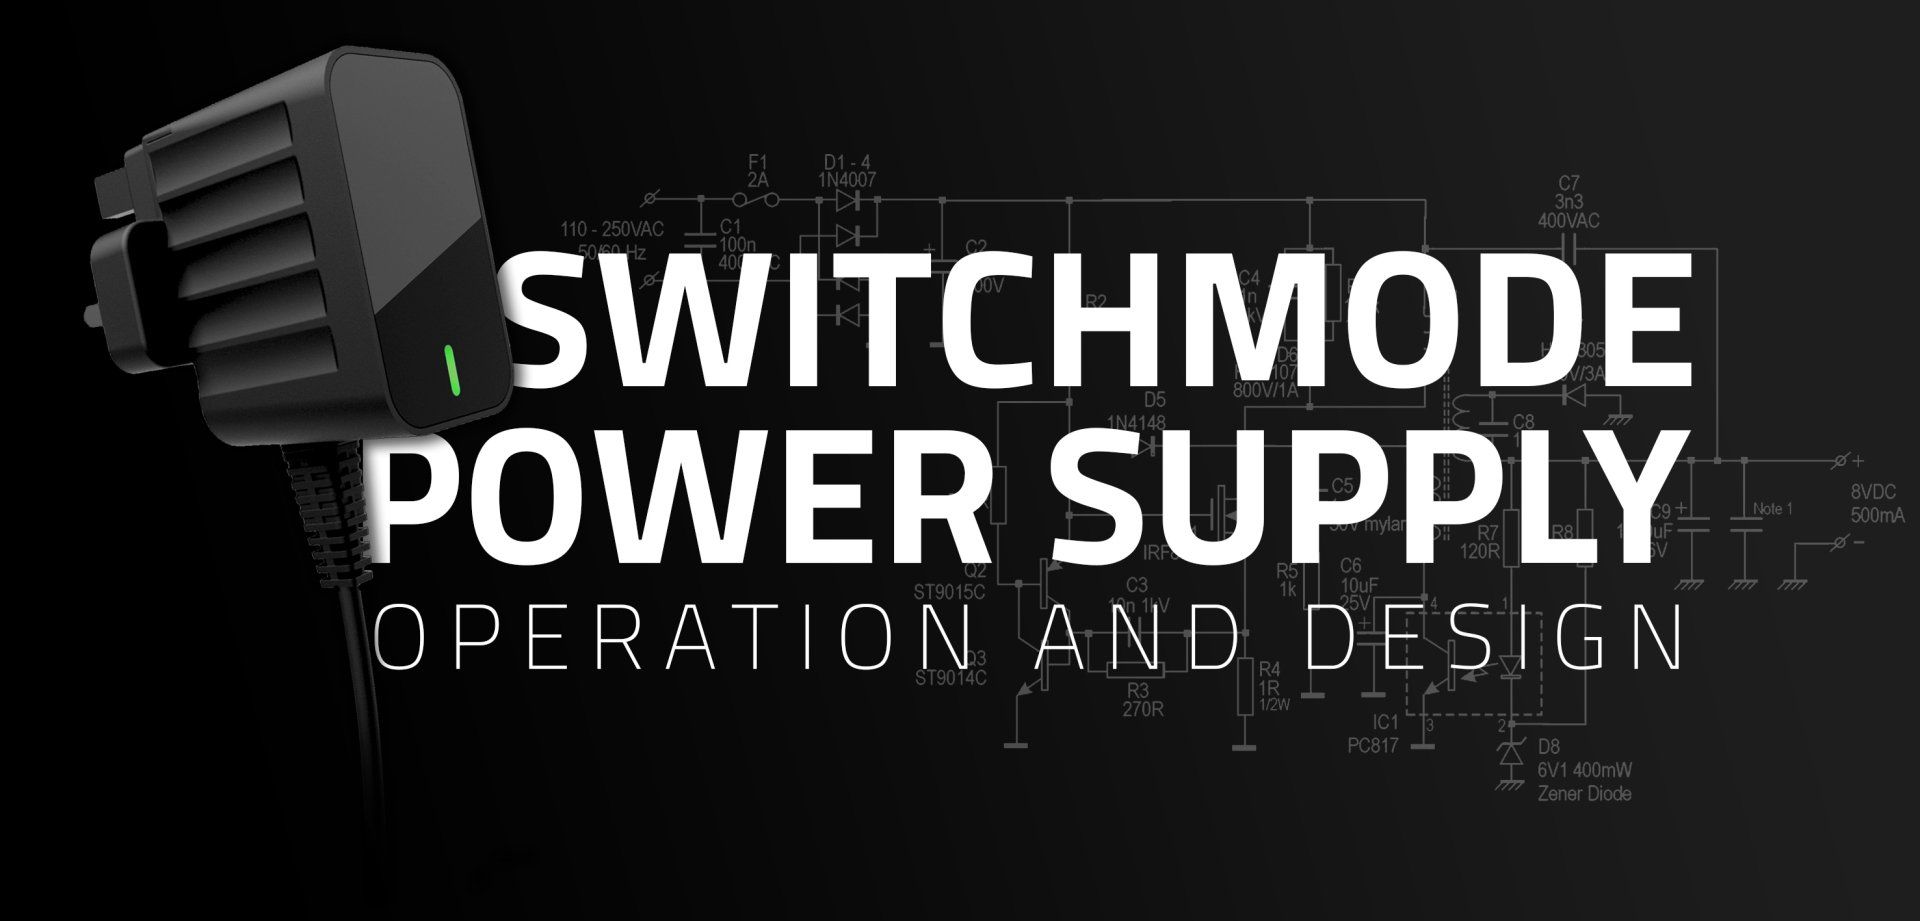 A logo for switch mode power supply operation and design